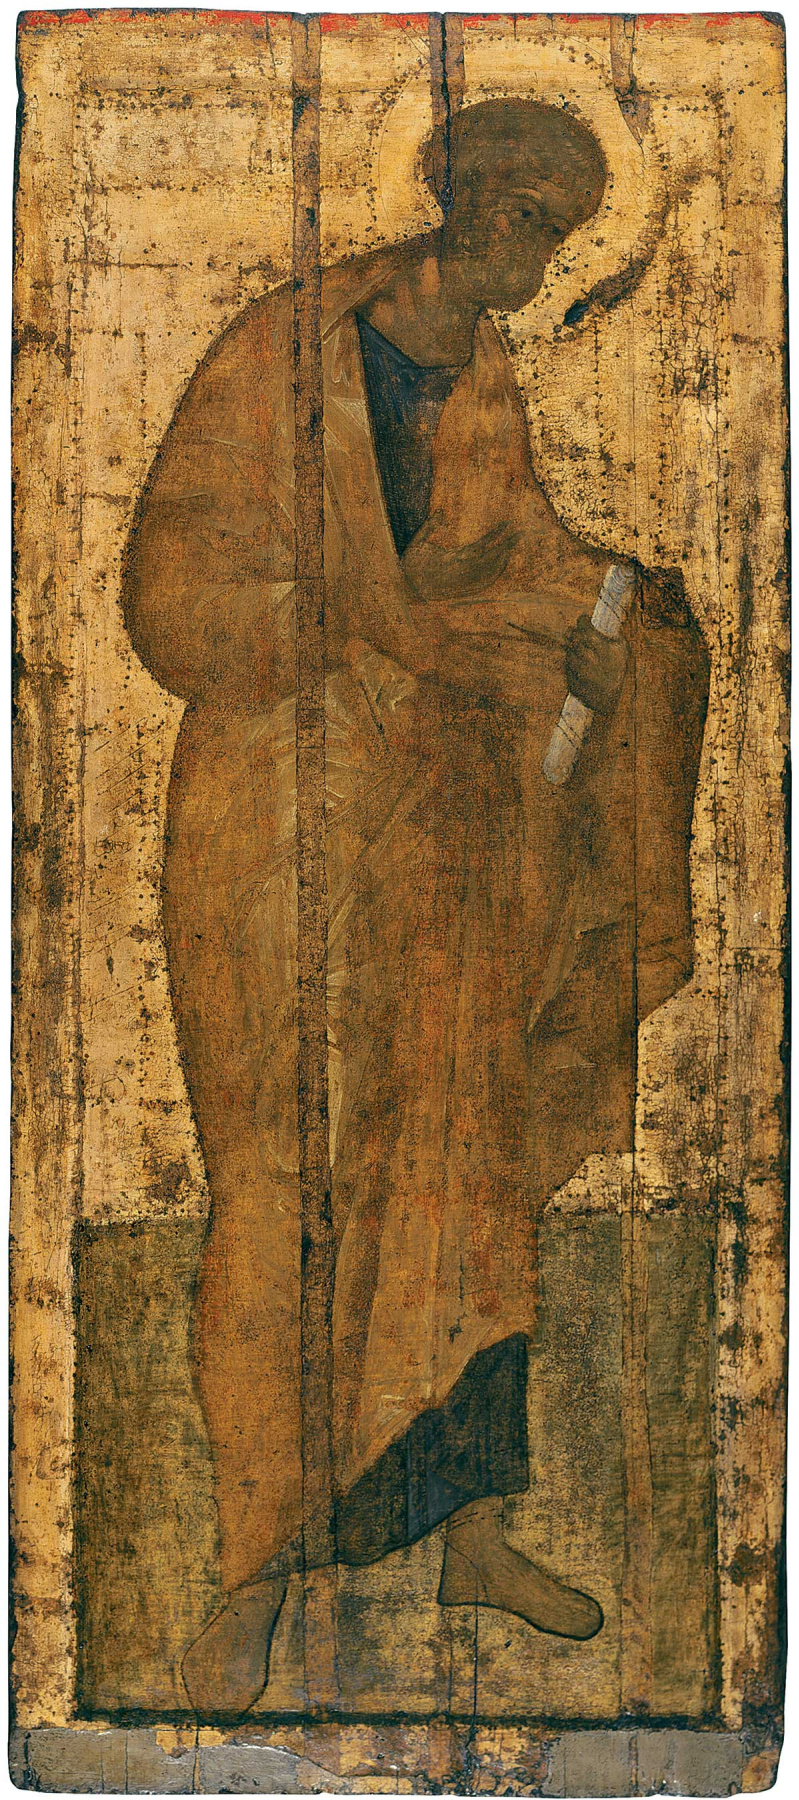 Andrey Rublev. The Apostle Peter